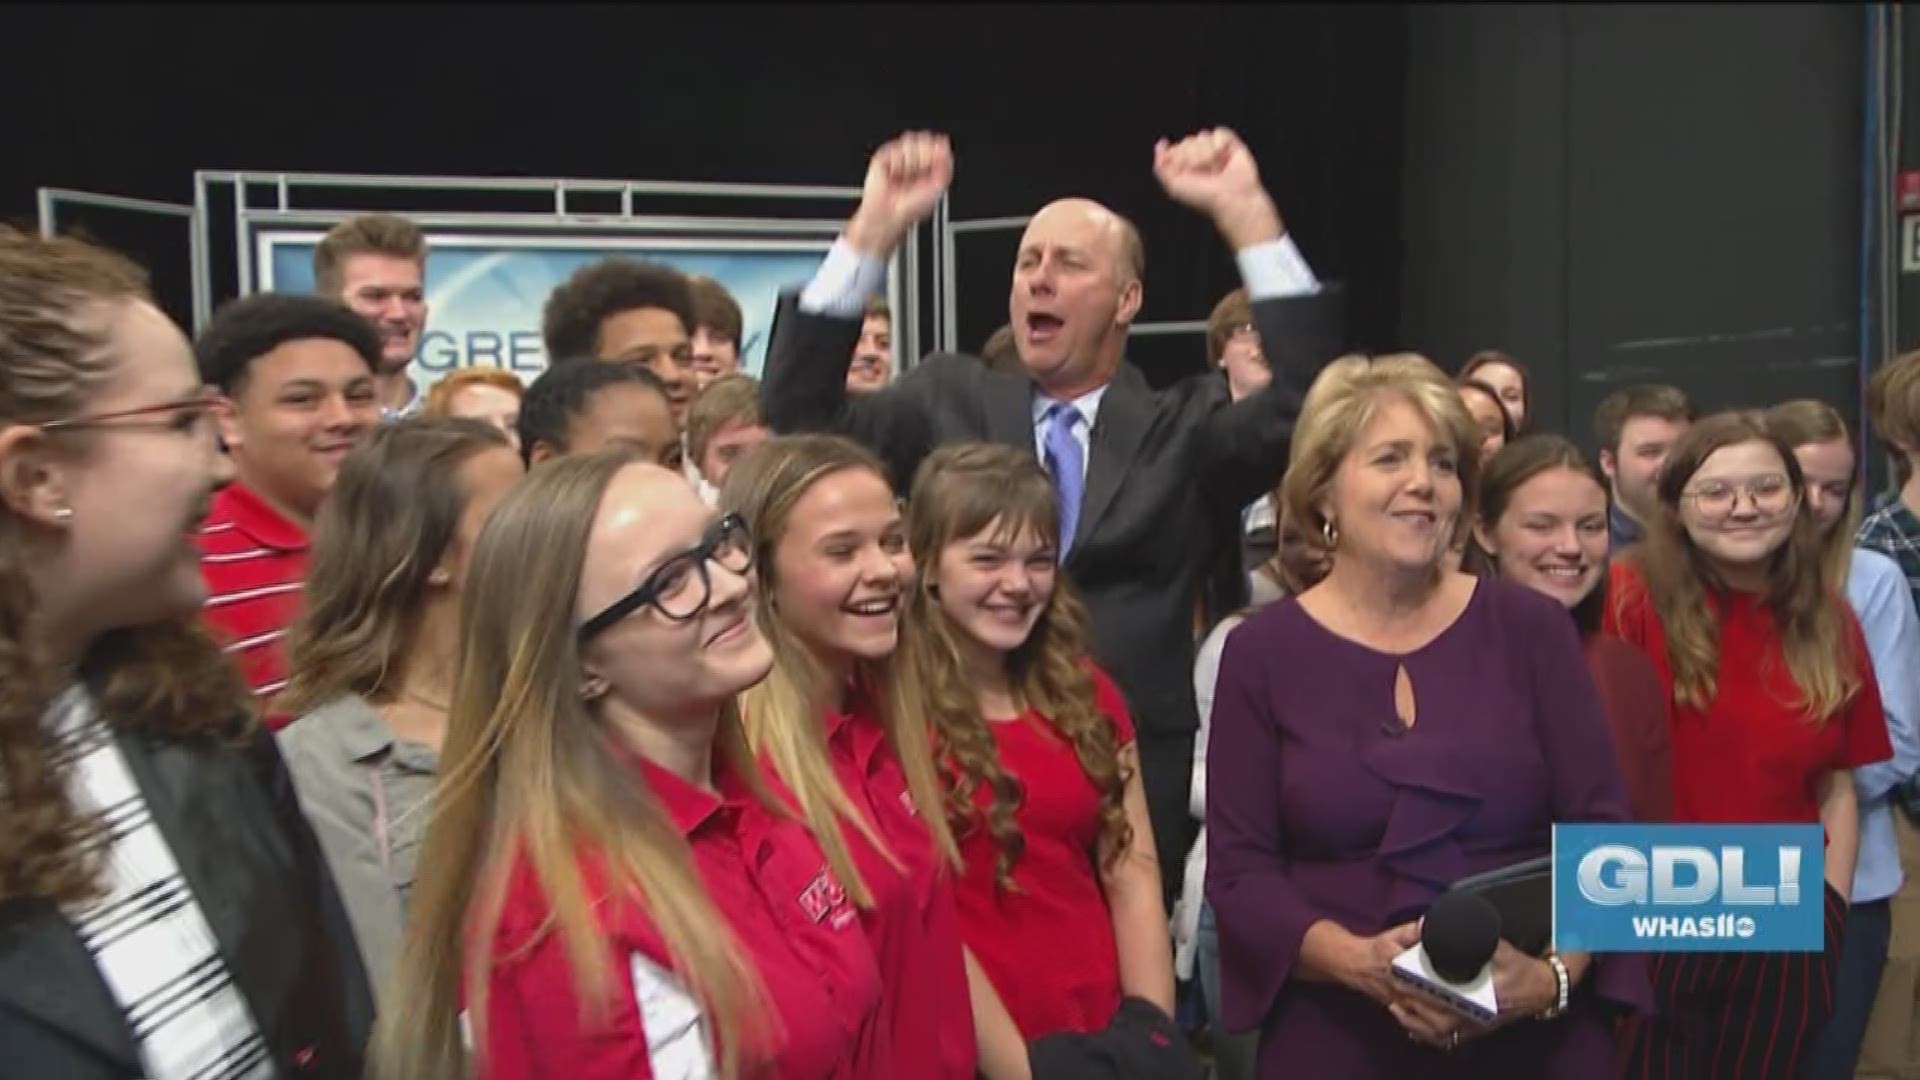 Radio & Television students from Jeffersonville High School stopped by Great Day Live for a day of shadowing and fun!